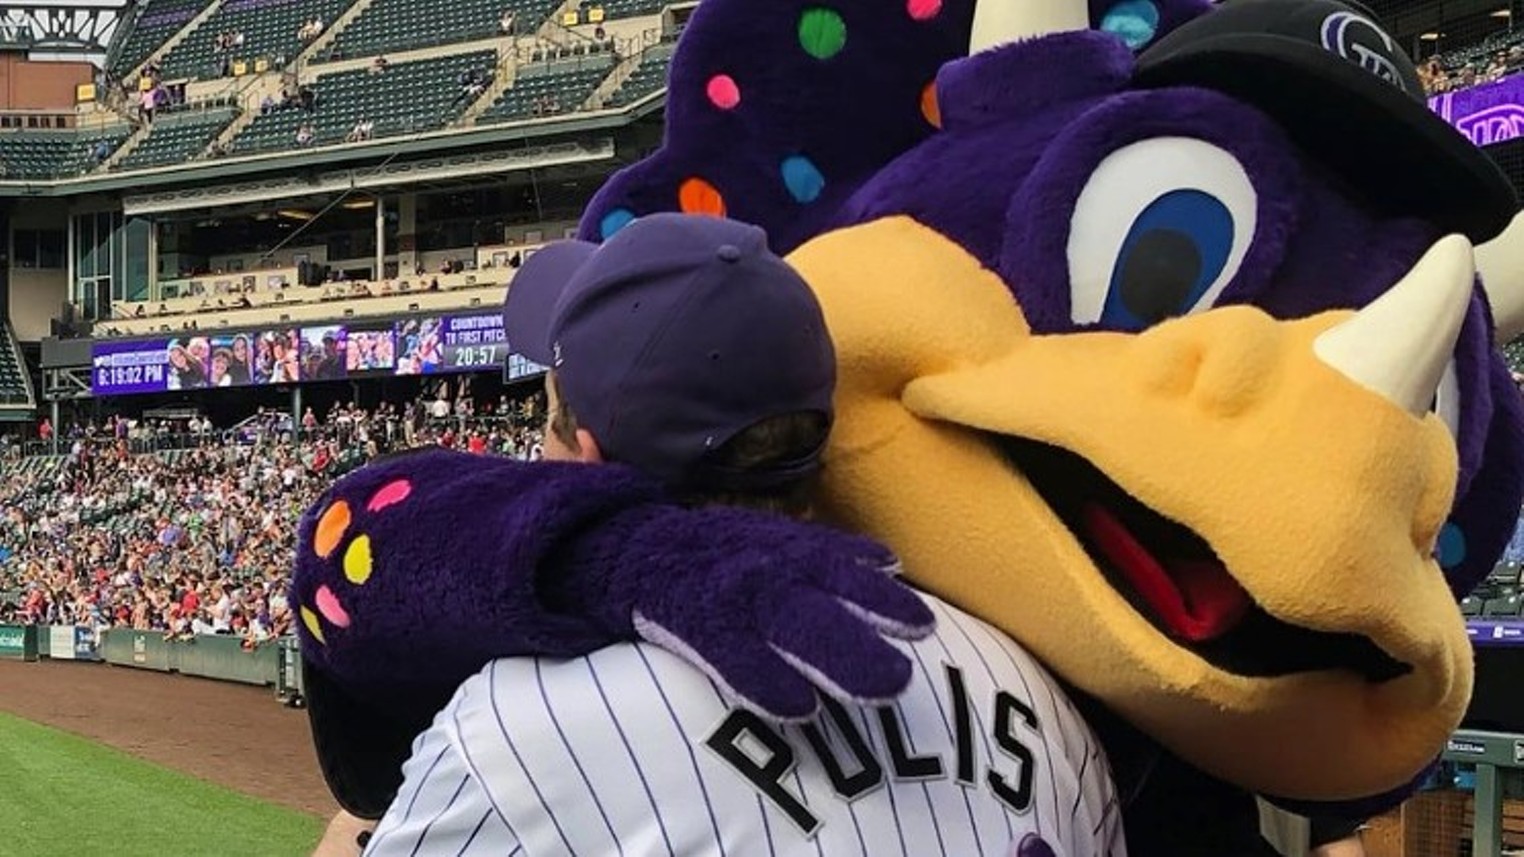 Dinger's Origins: Why a dinosaur represents the Rockies